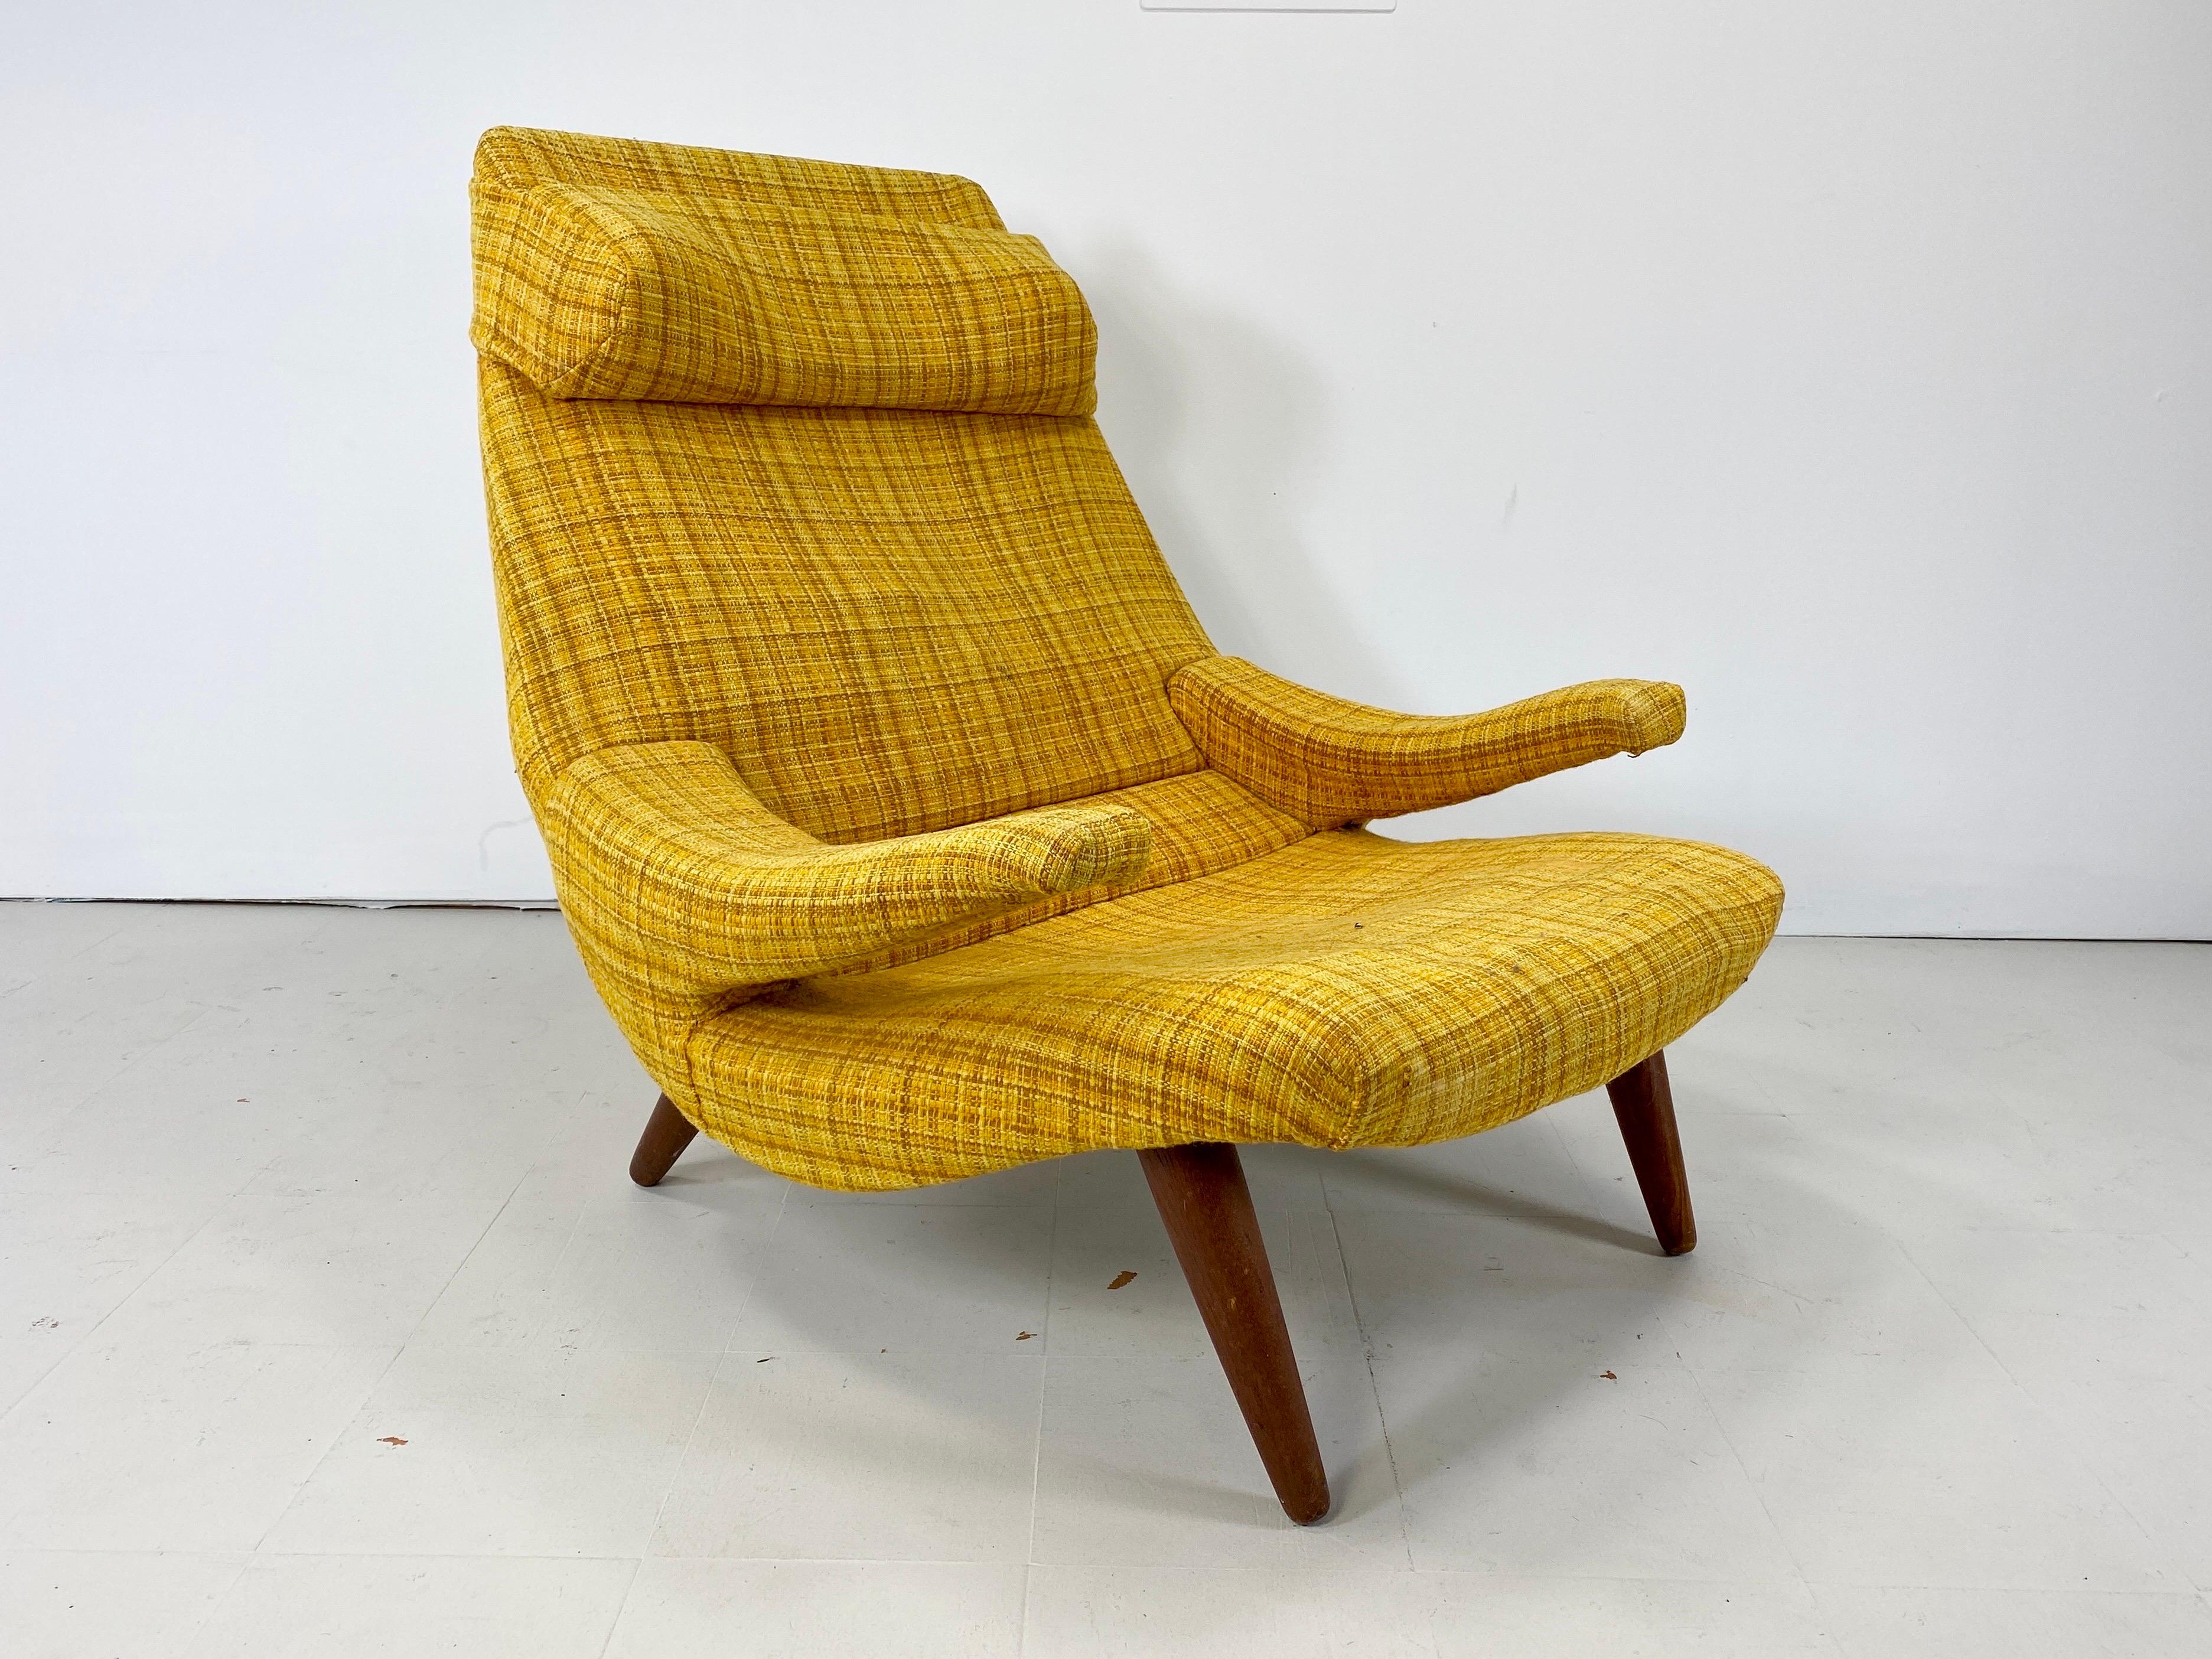 1960s Danish Lounge Chair In Good Condition For Sale In Turners Falls, MA